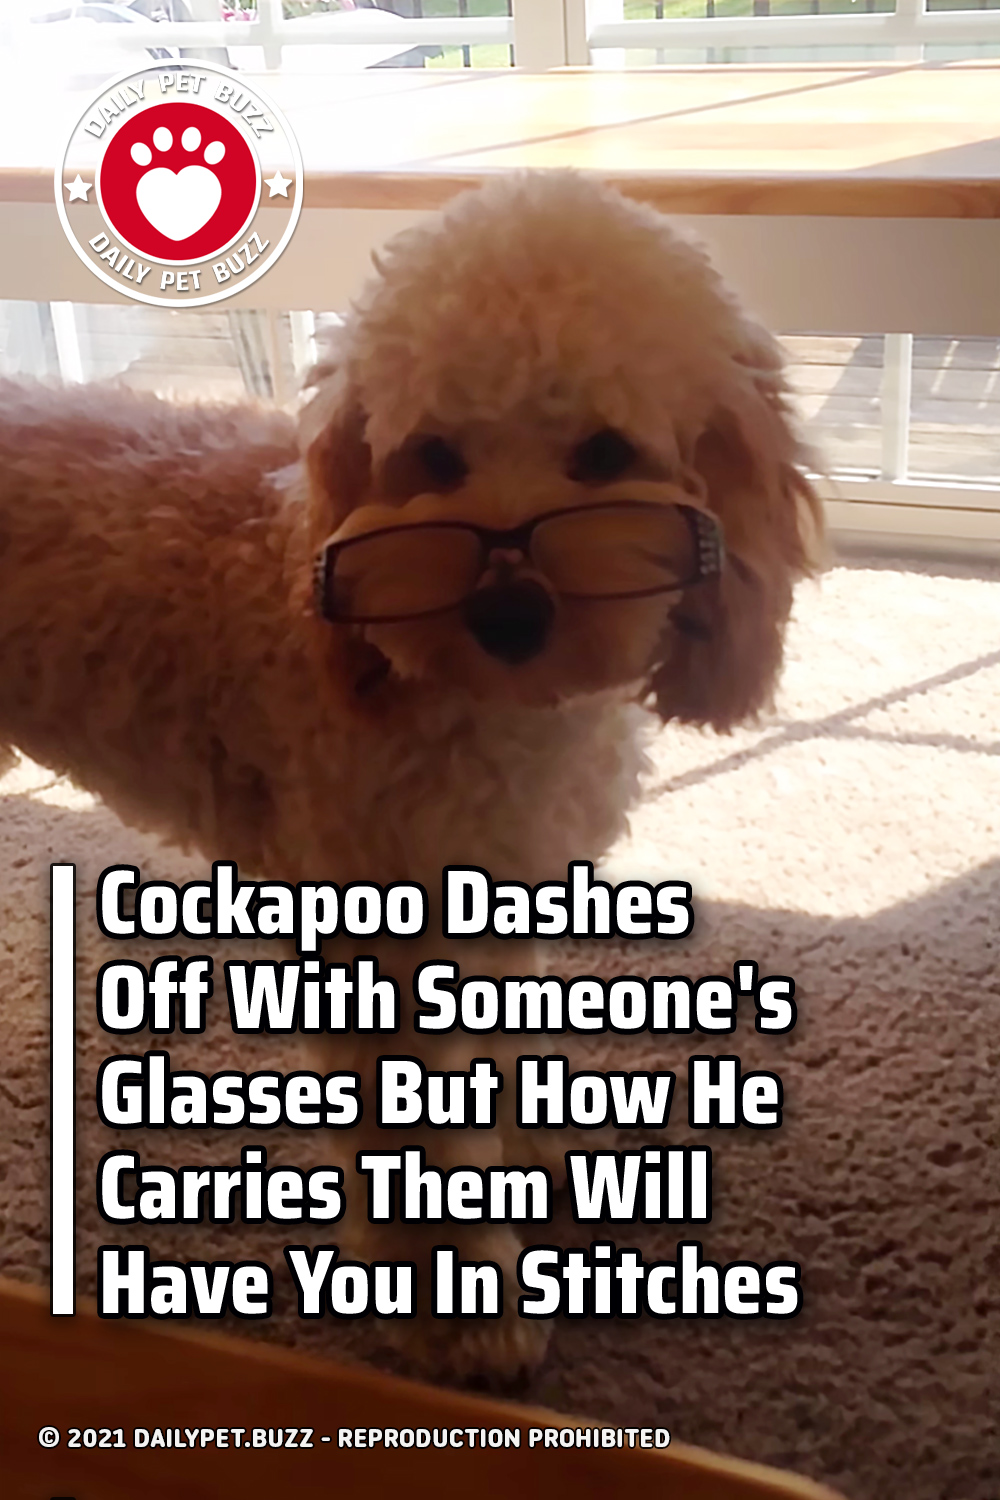 Cockapoo Dashes Off With Someone\'s Glasses But How He Carries Them Will Have You In Stitches